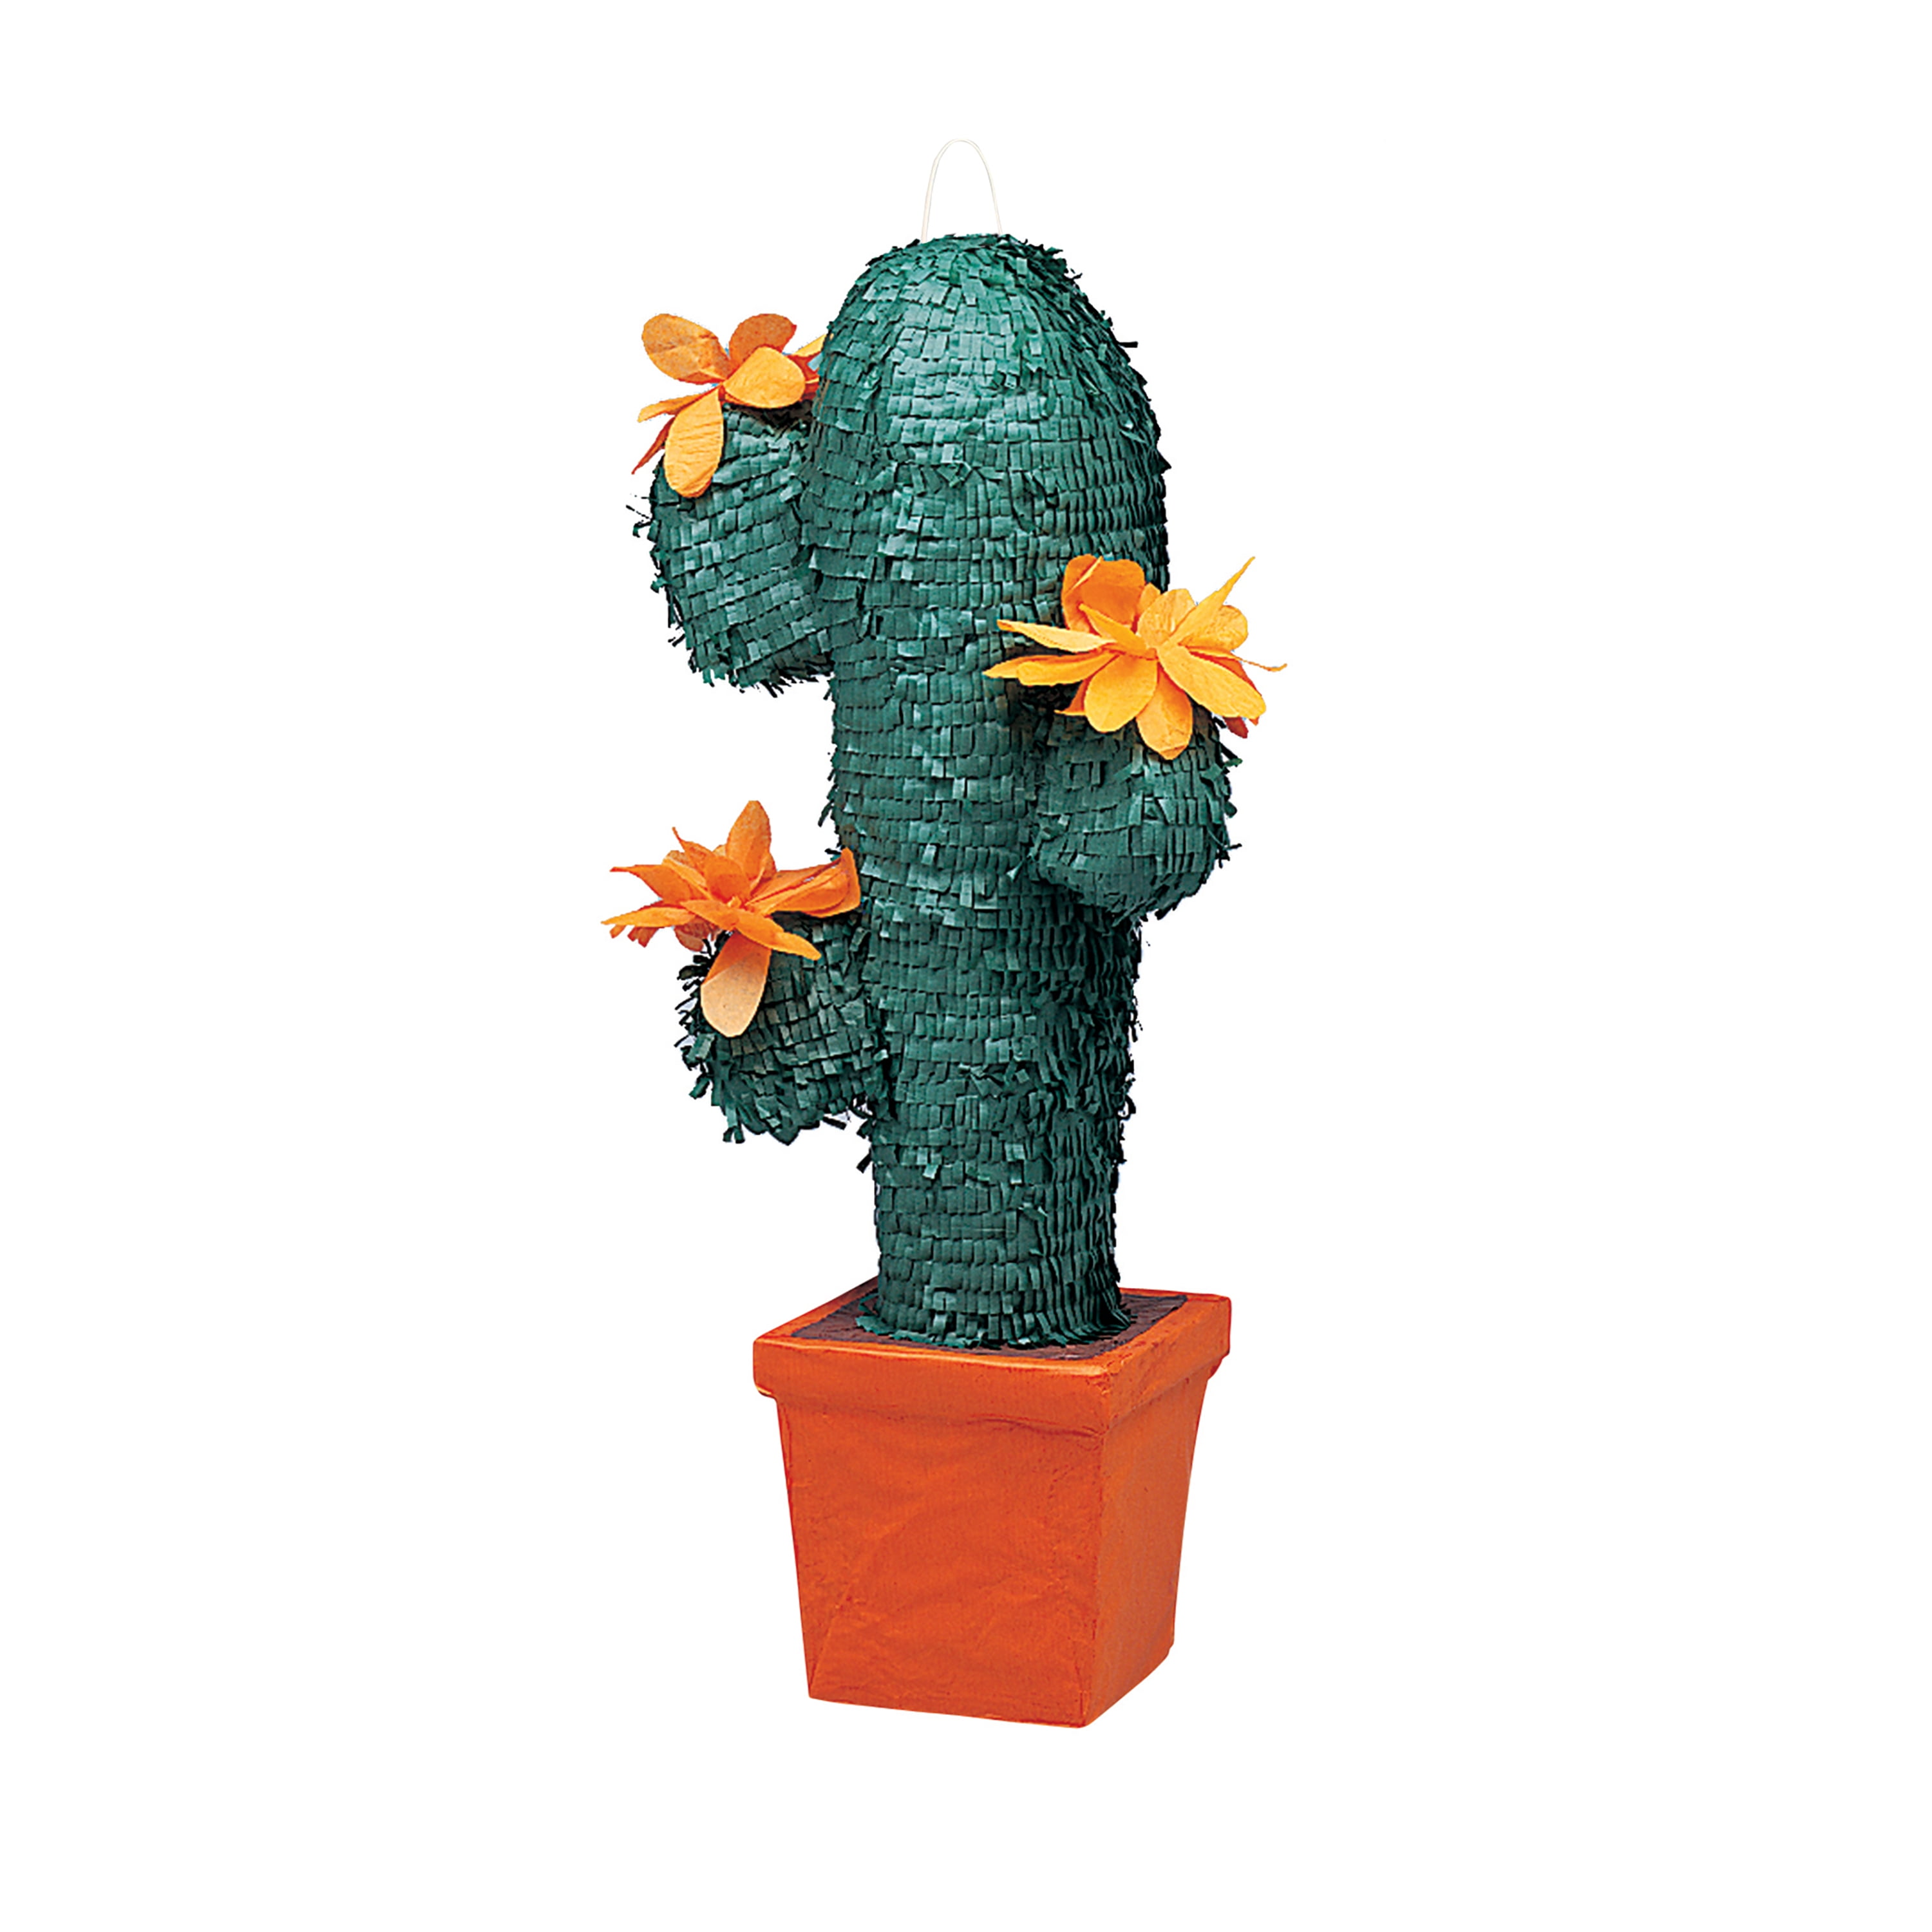 Cactus Pinata for all your Fiesta celebrations